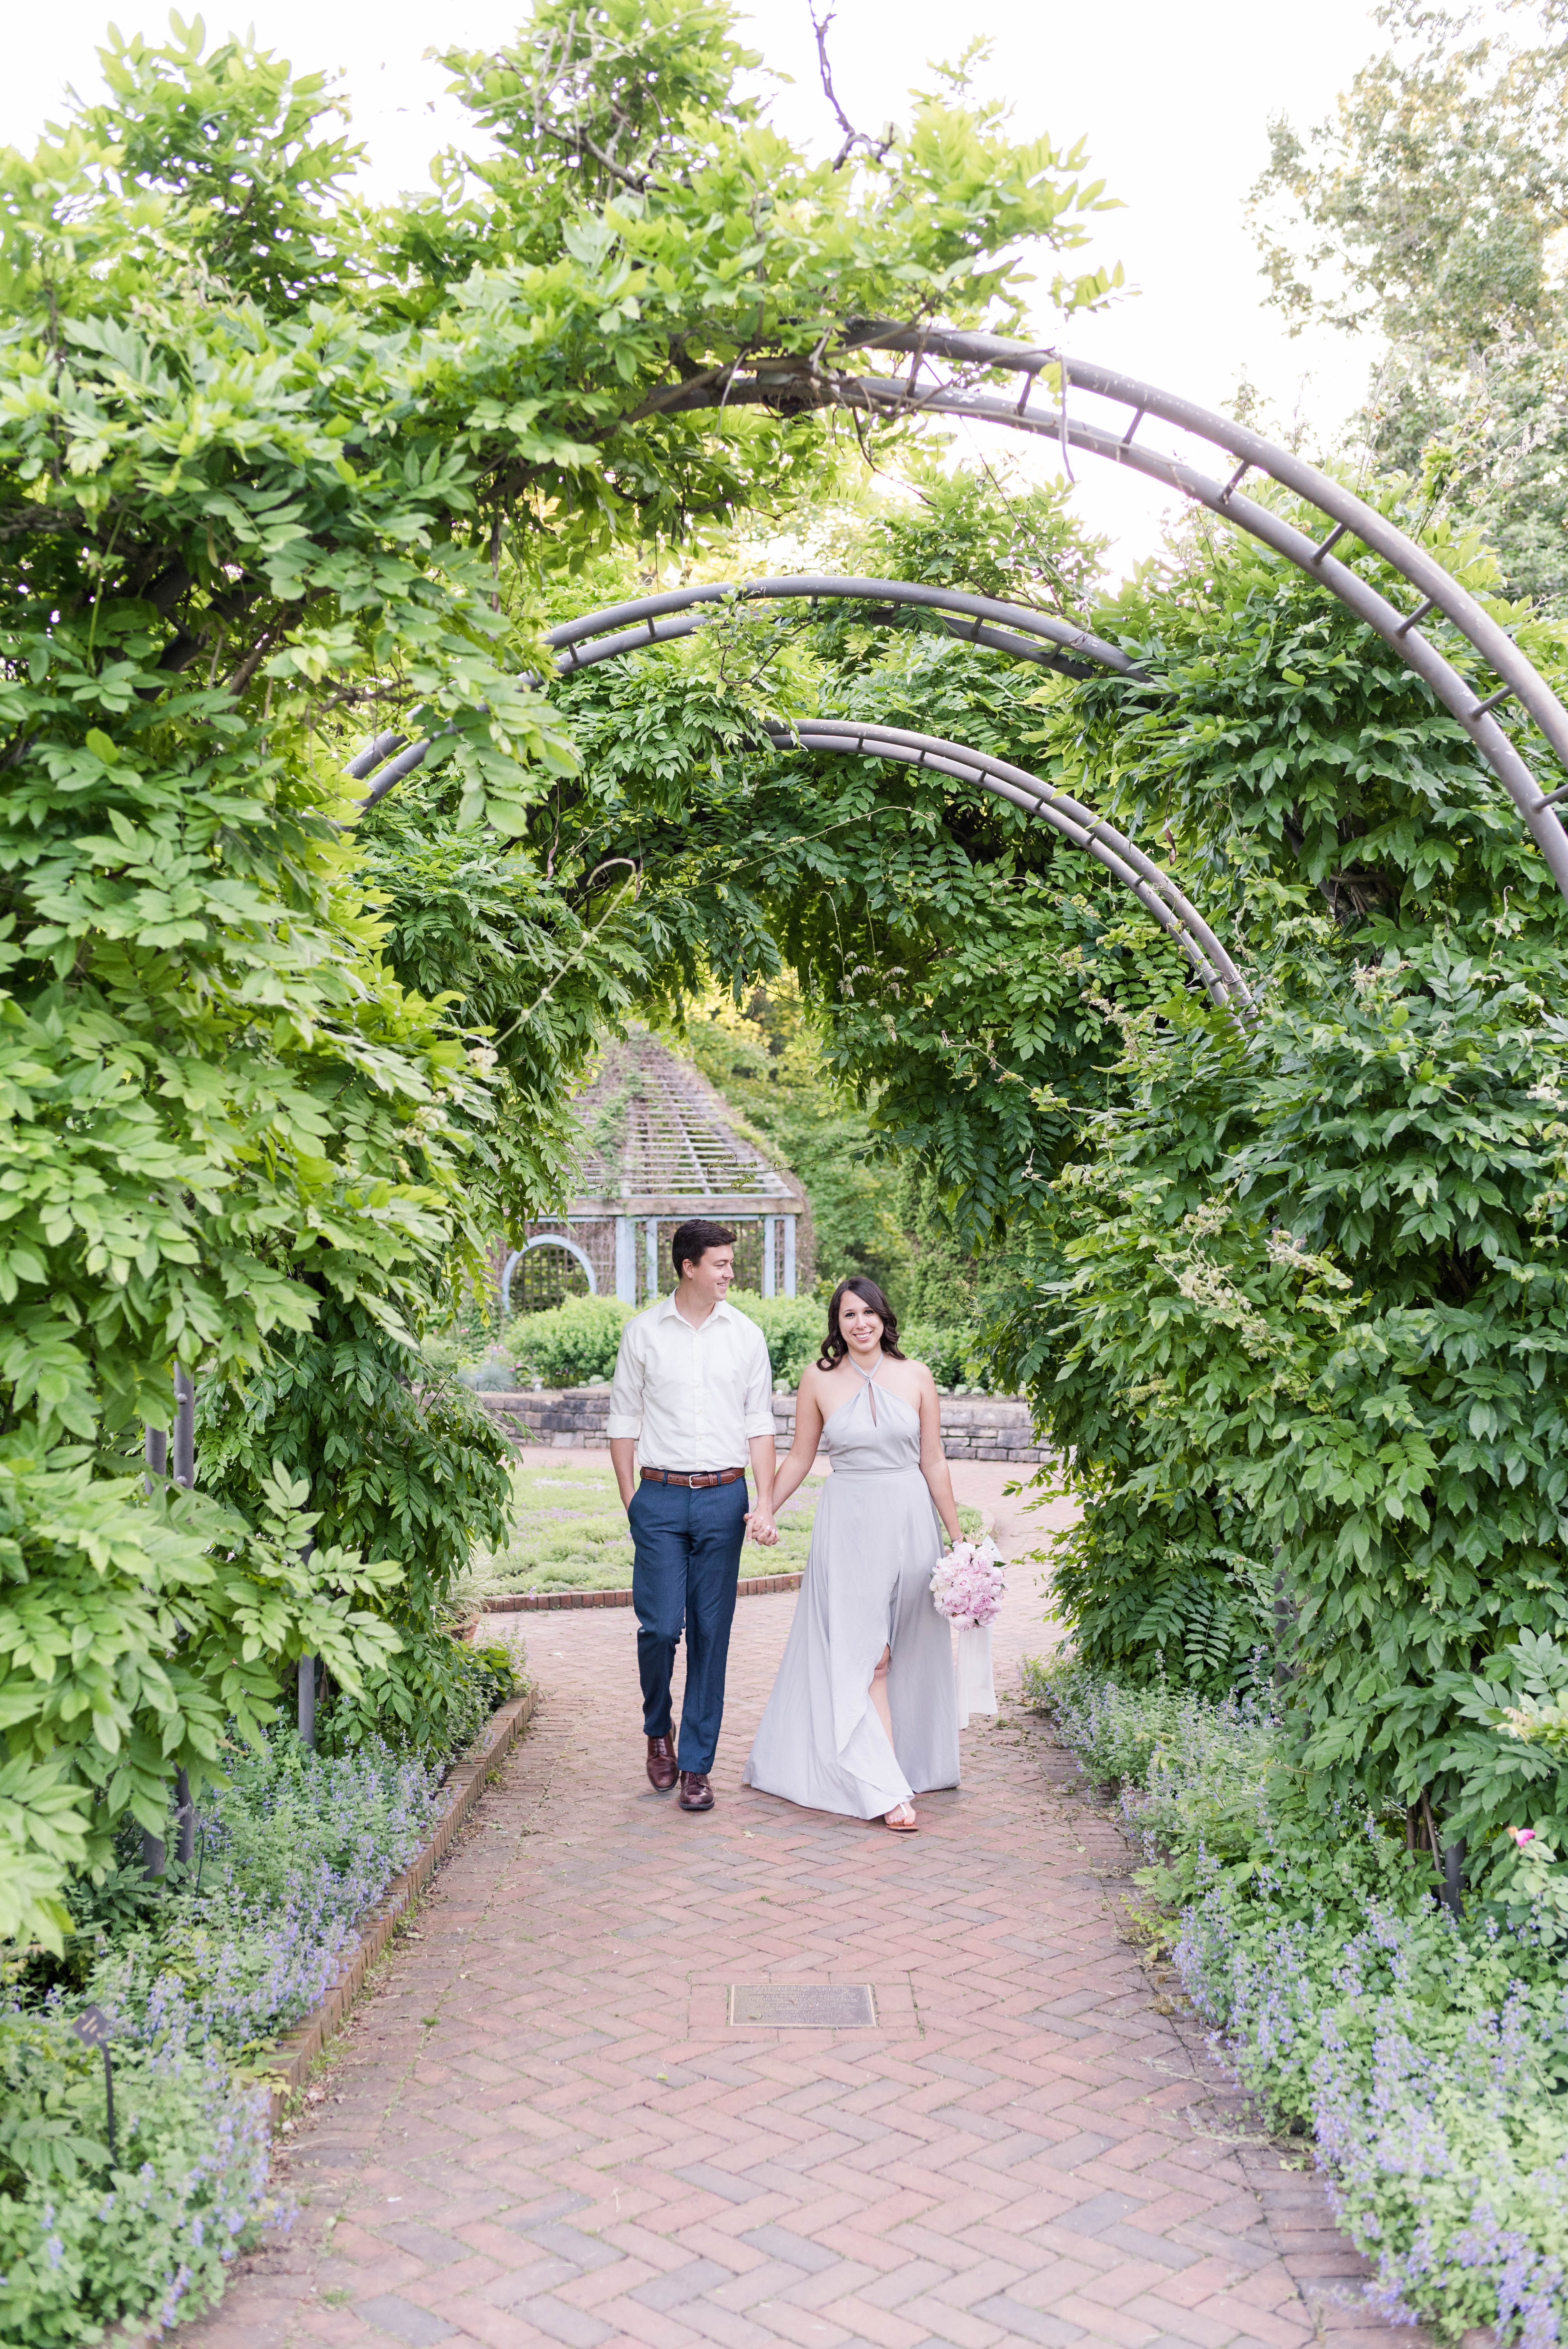 Anniversary Session At Inniswood Gardens - Westerville, Ohio